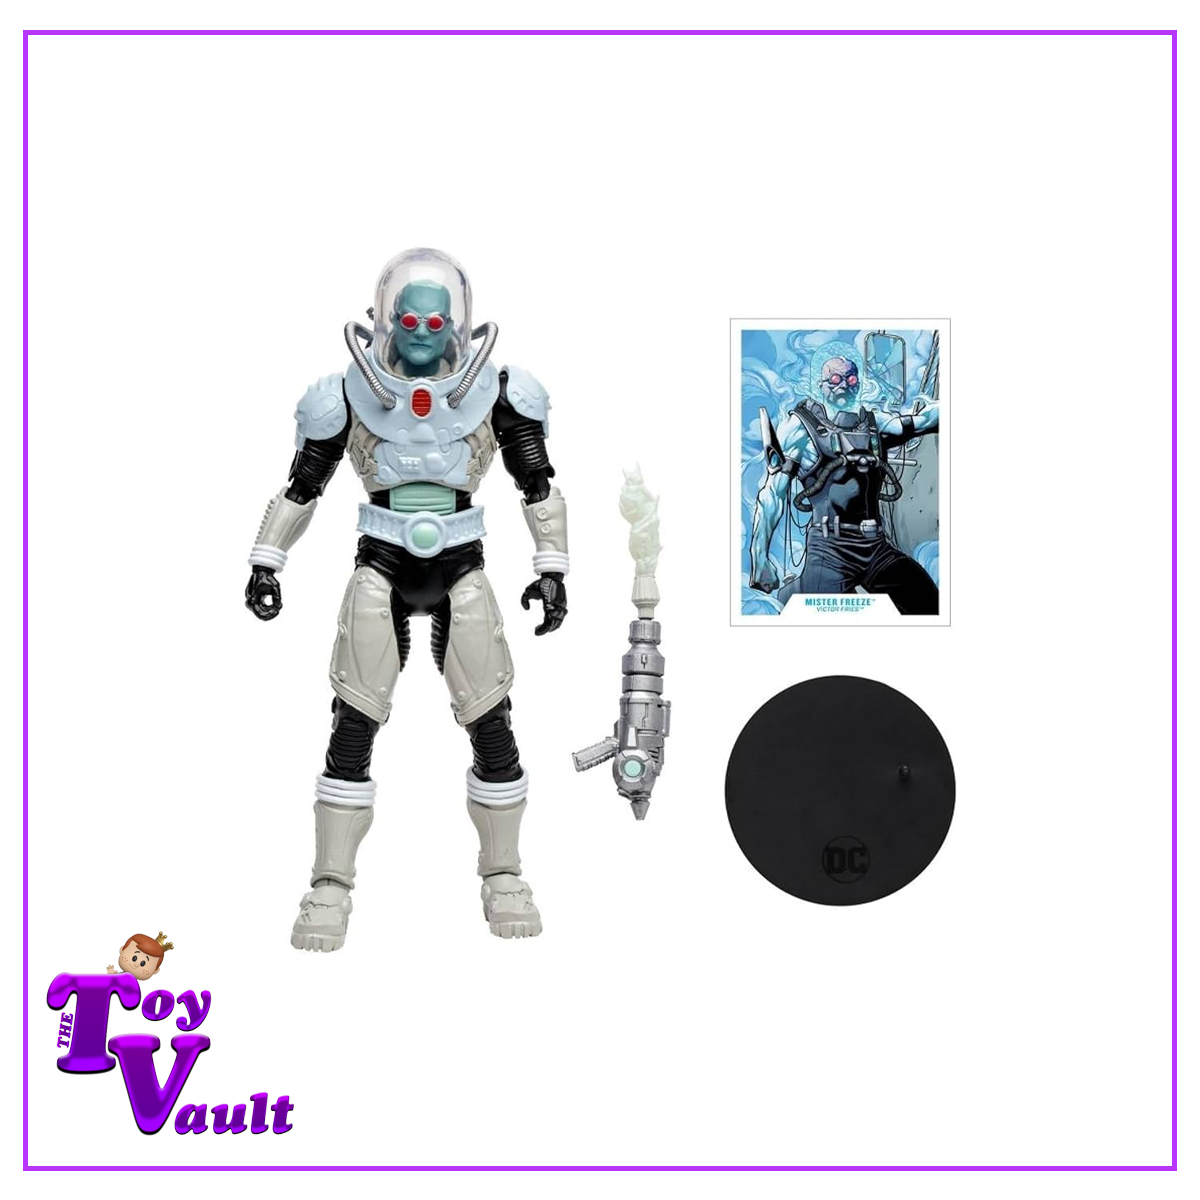 McFarlane Toys DC Heroes Multiverse Batman - Mister Freeze (Victor Fries) 7 inch Action Figure with Gun